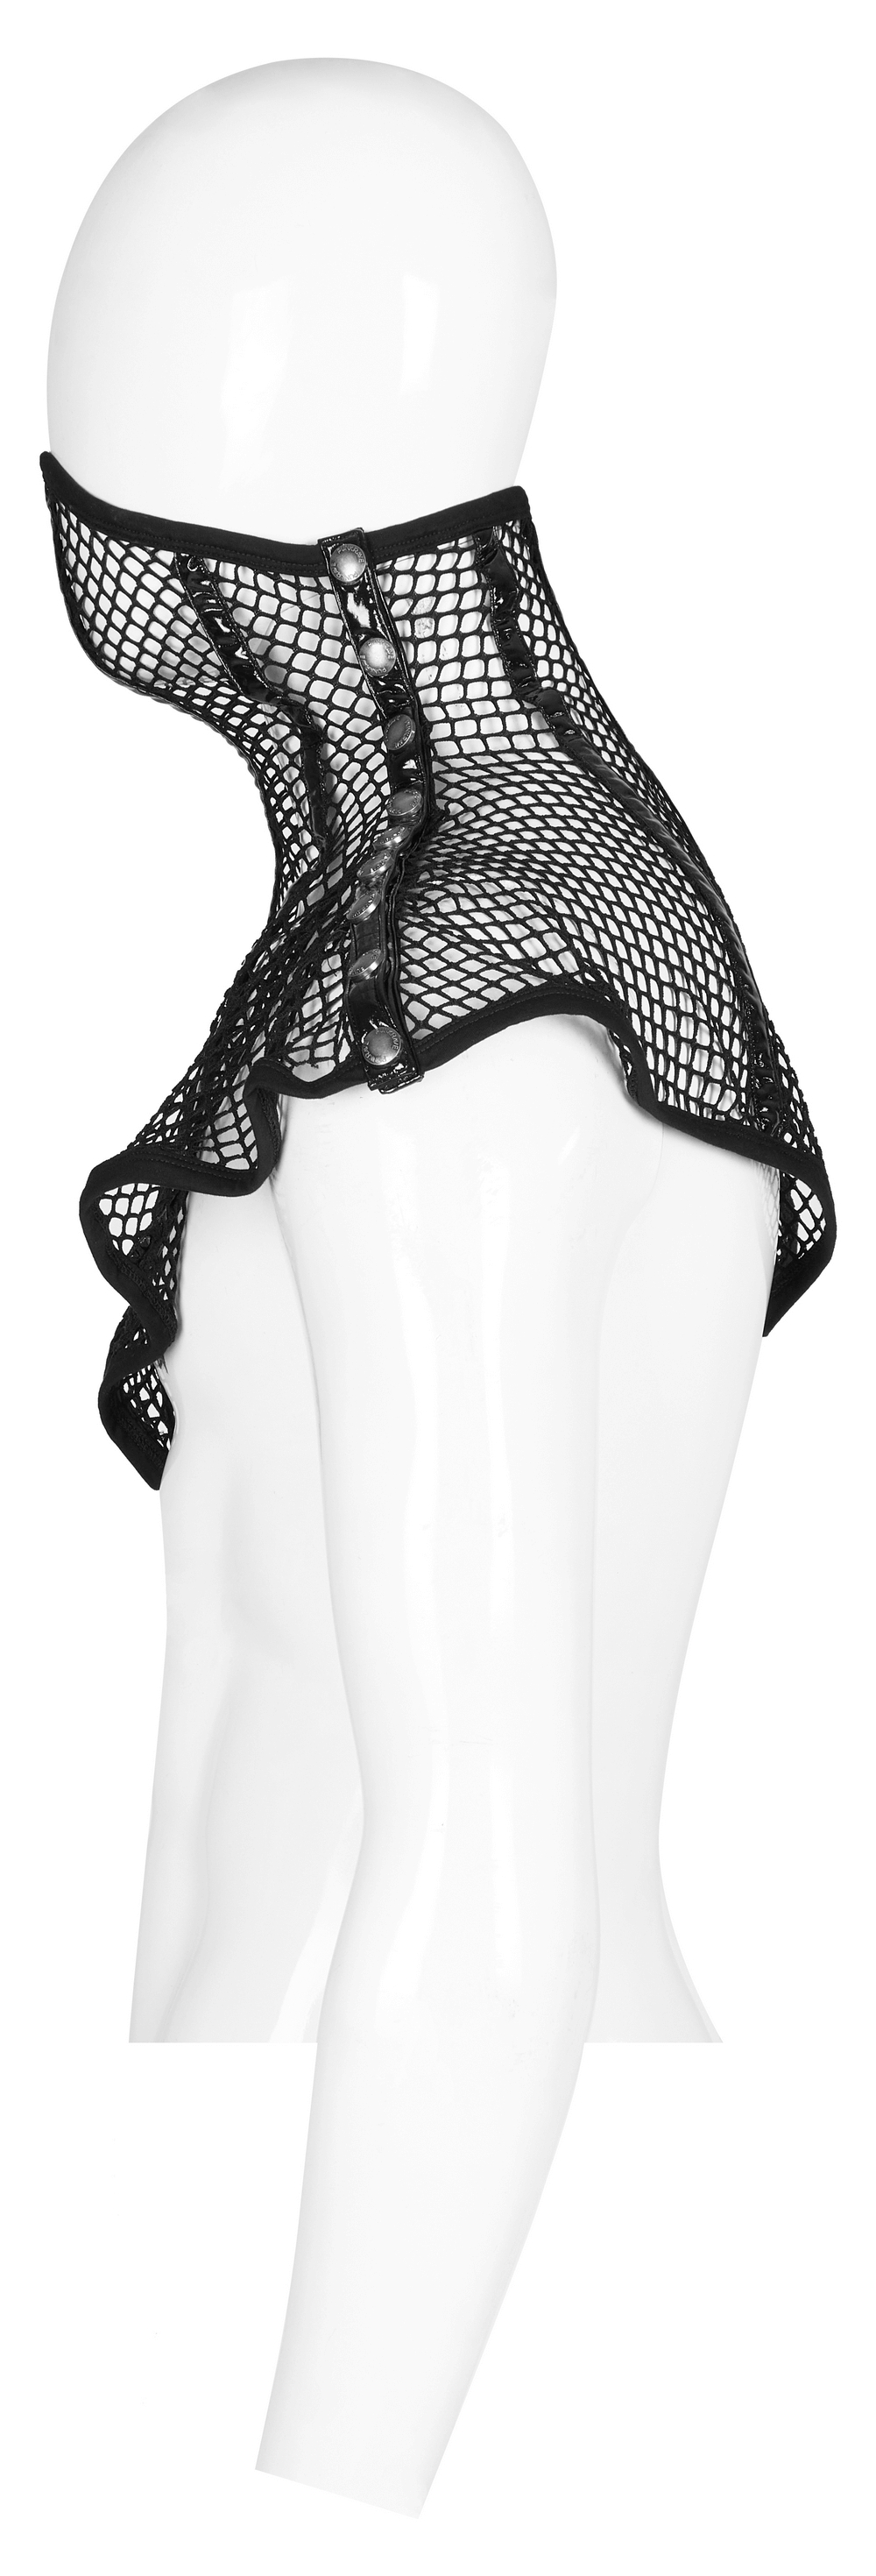 Chic Black Mesh Statement Mask Collar with Shoulder Pads